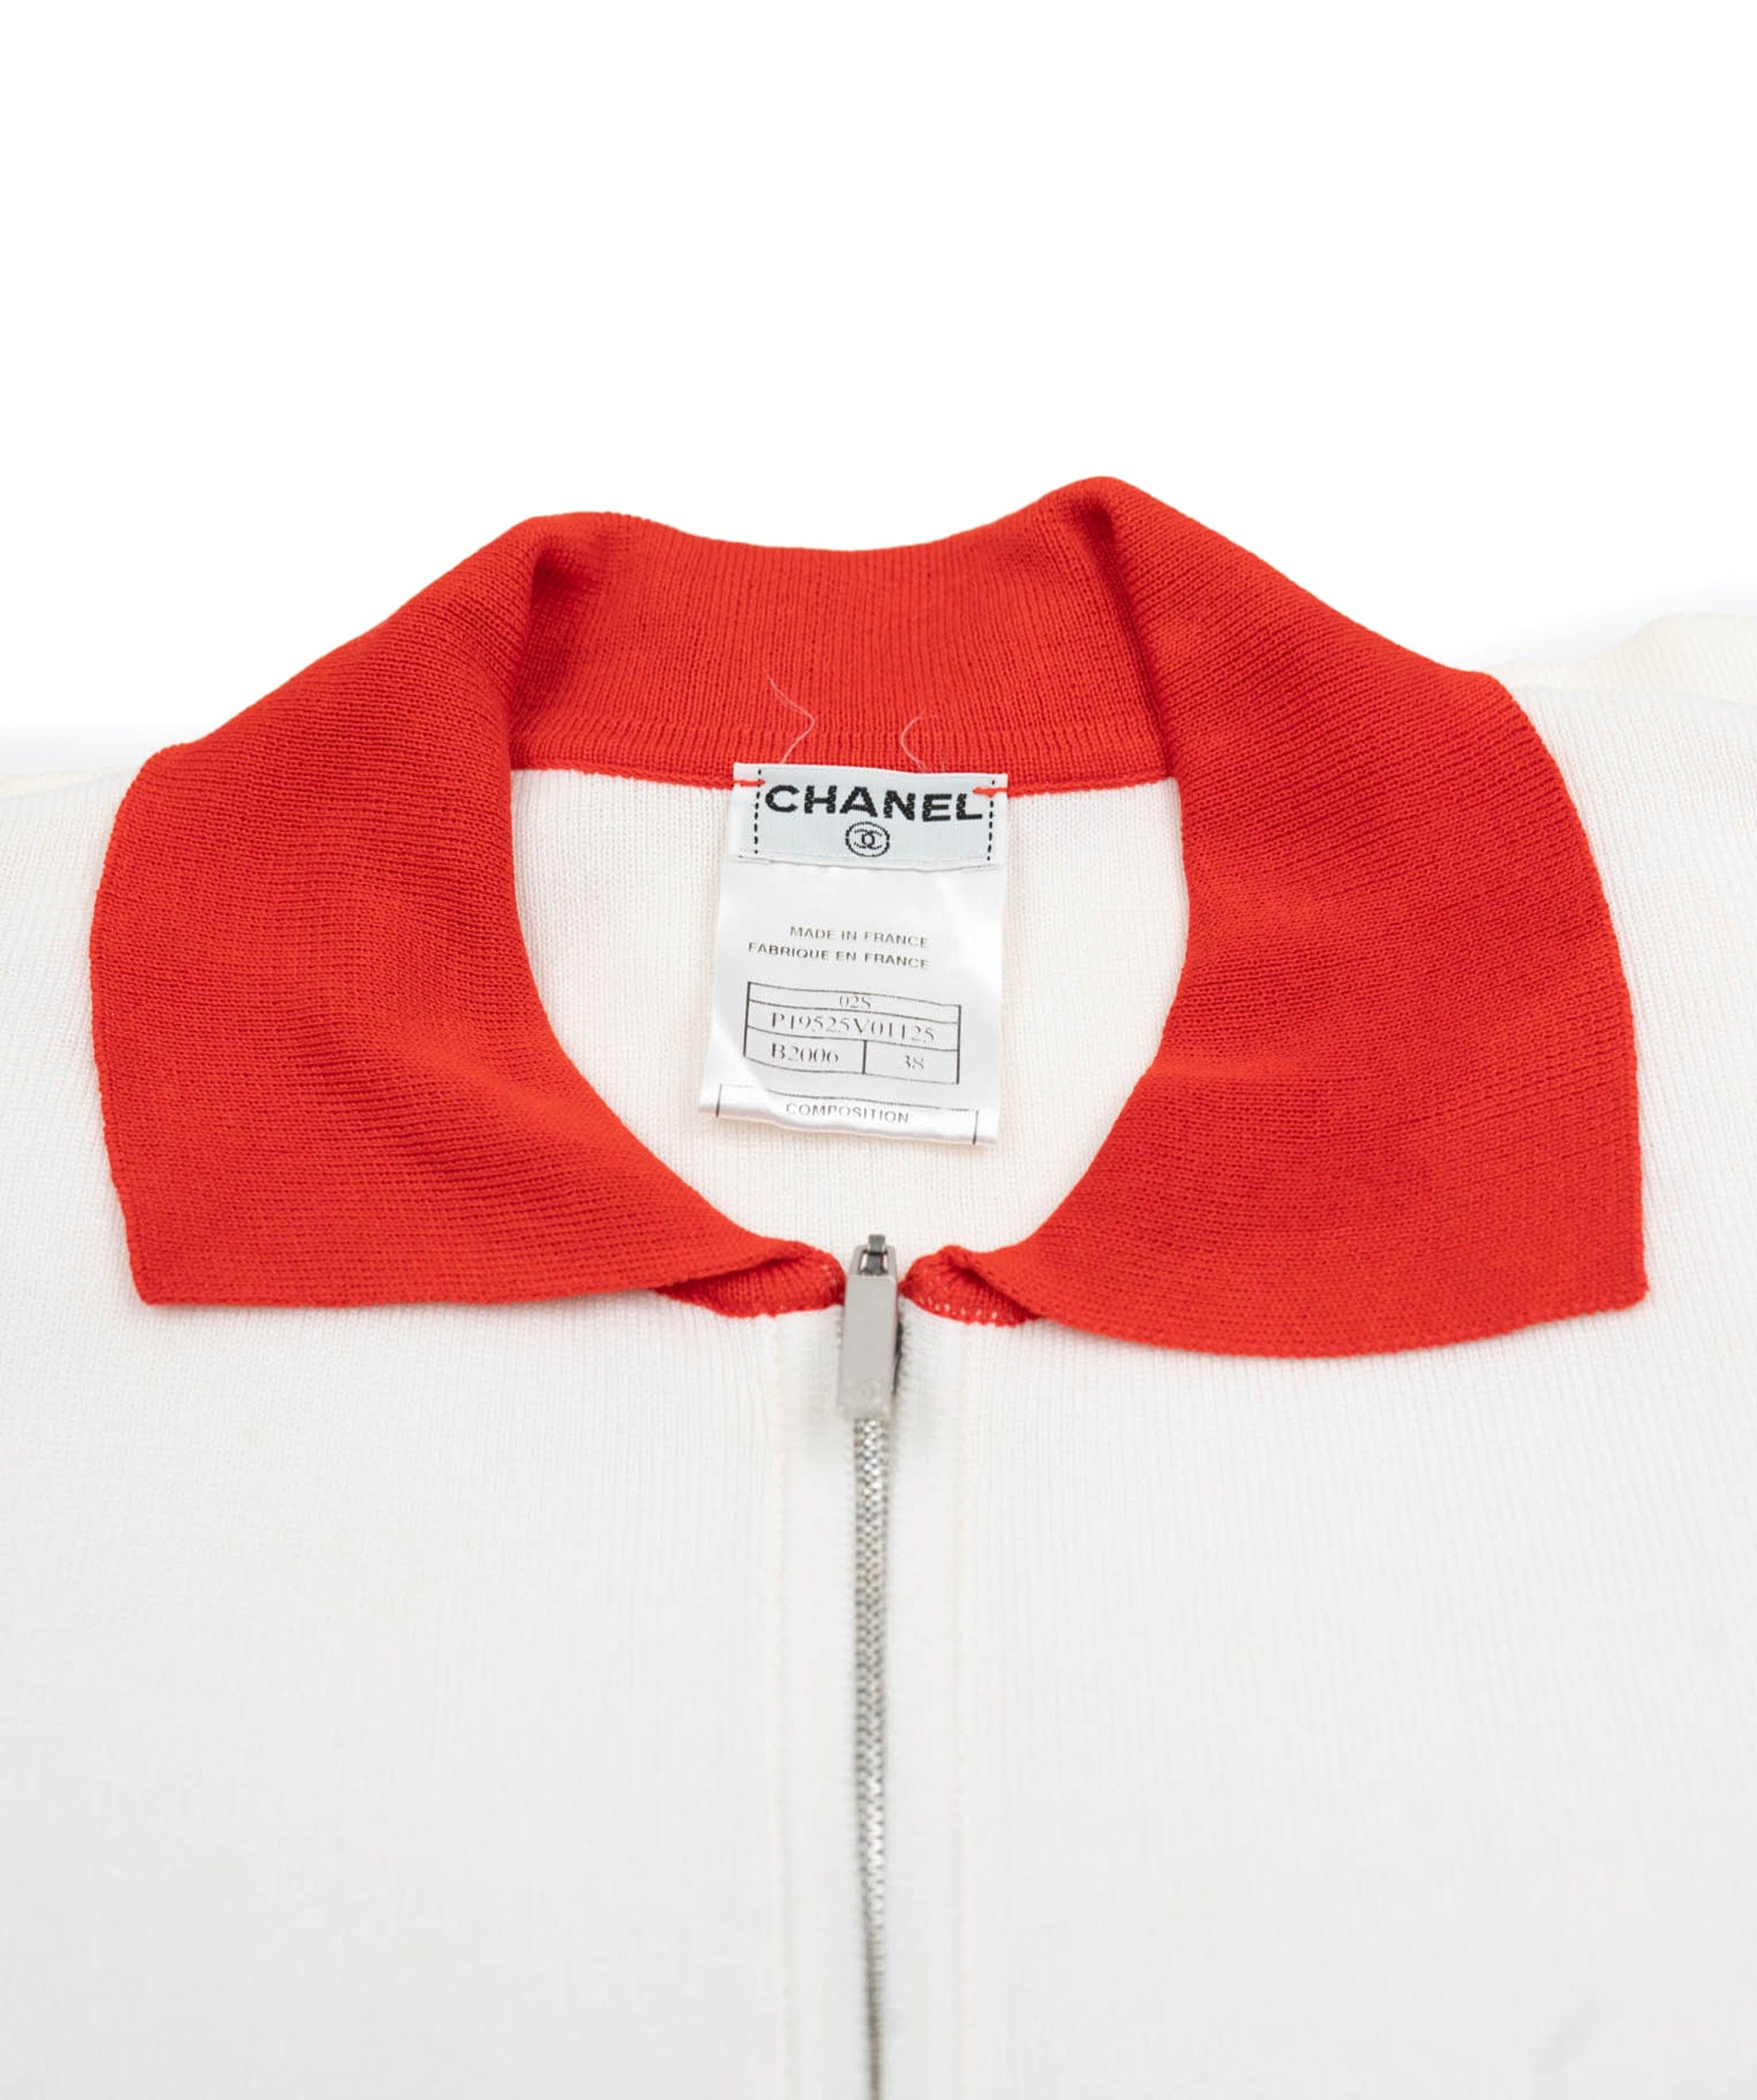 Chanel Chanel 02S Full Zip Knit Top White Red ASL4873